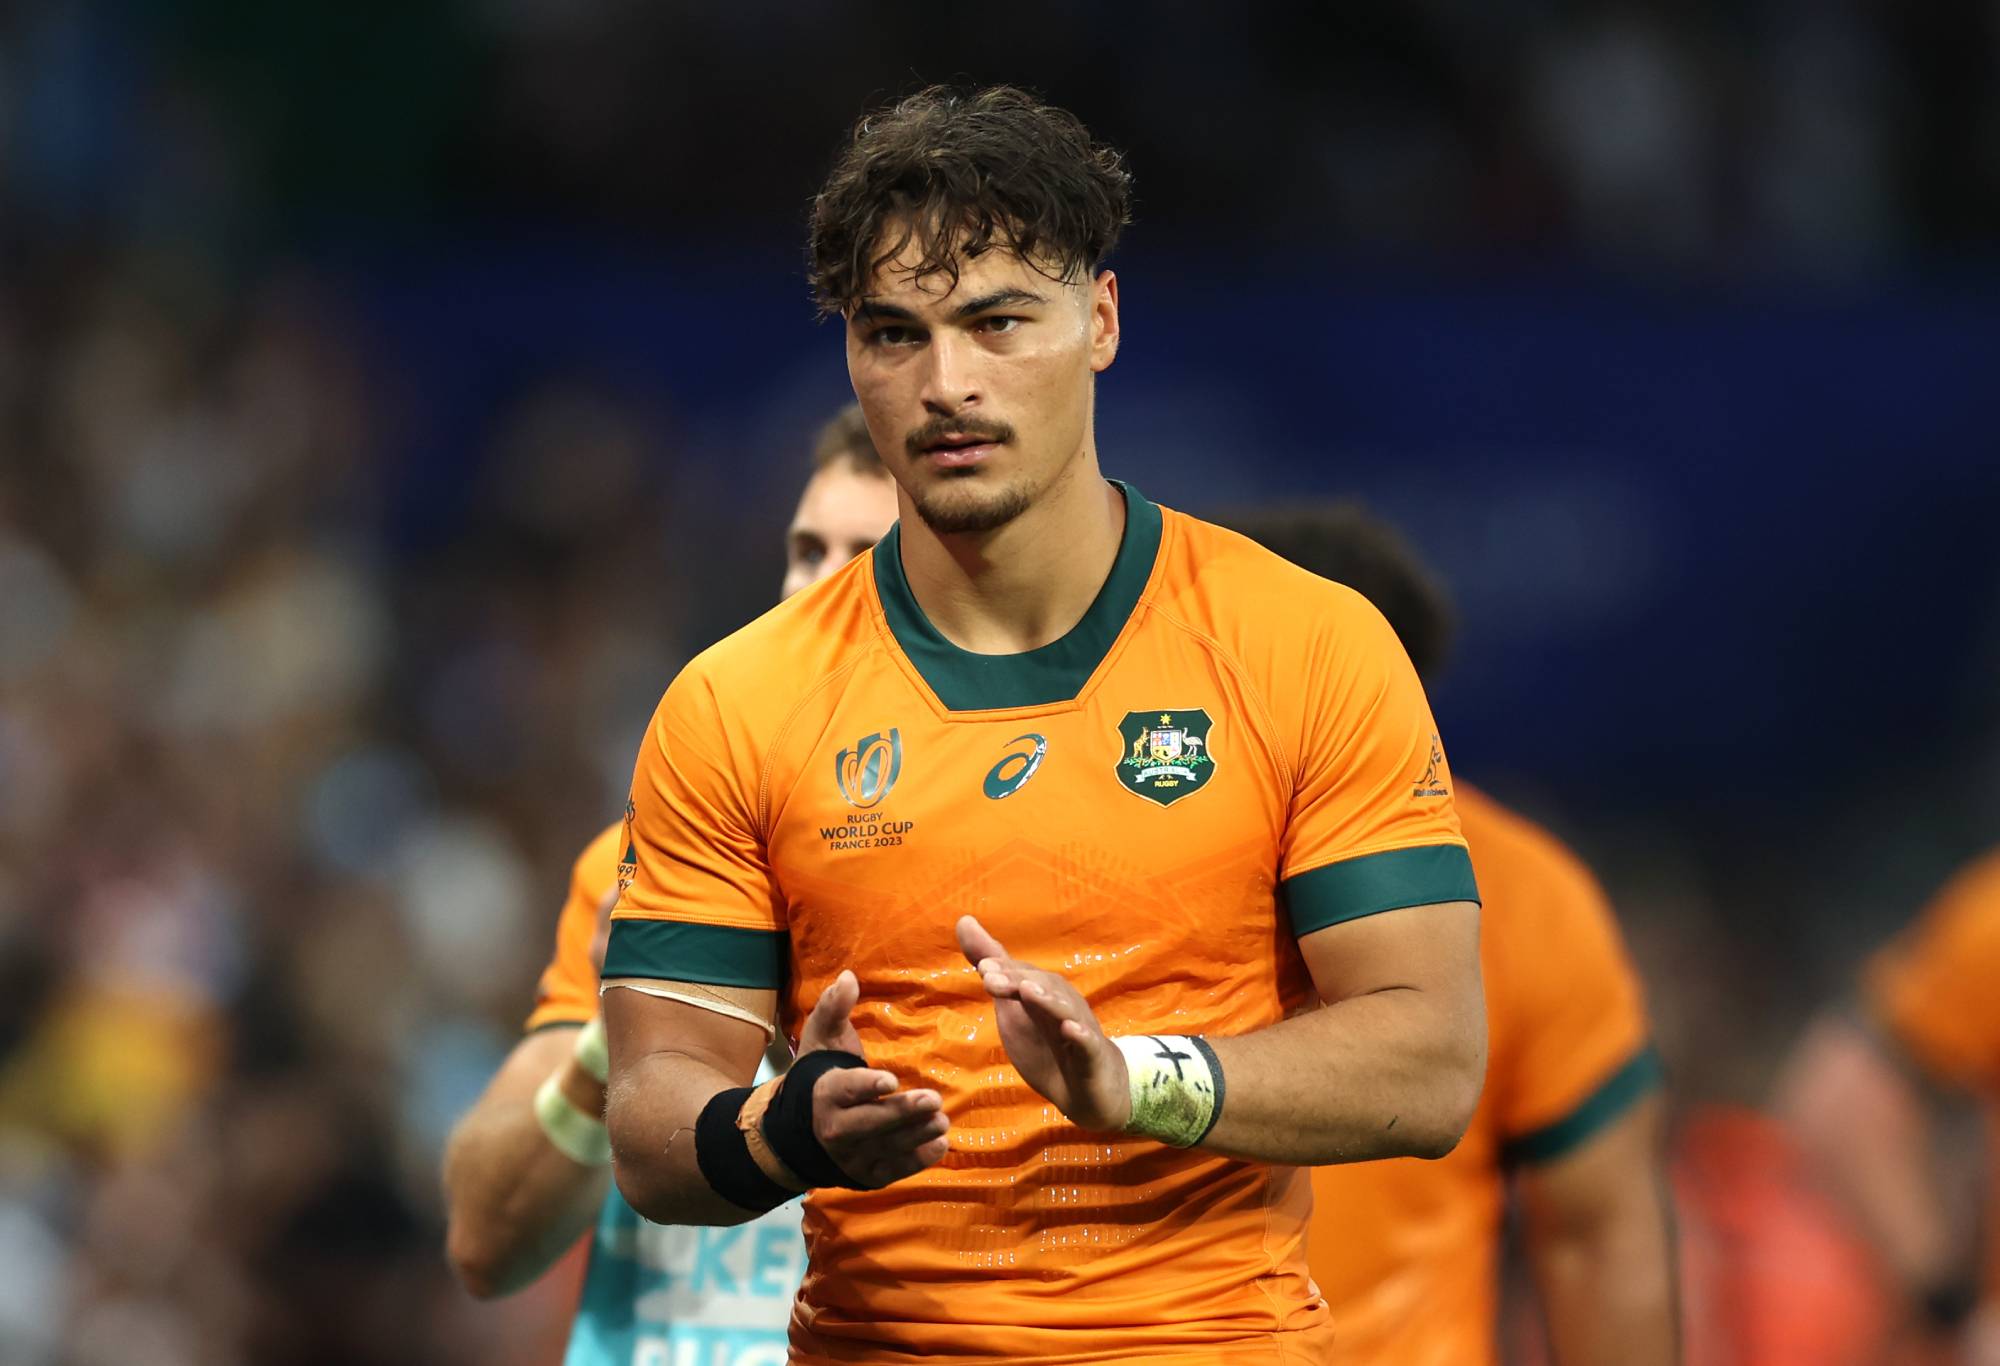 Jordan Petaia of Australia looks dejected at full-time following the Rugby World Cup France 2023 match between Australia and Fiji at Stade Geoffroy-Guichard on September 17, 2023 in Saint-Etienne, France. (Photo by Phil Walter/Getty Images)